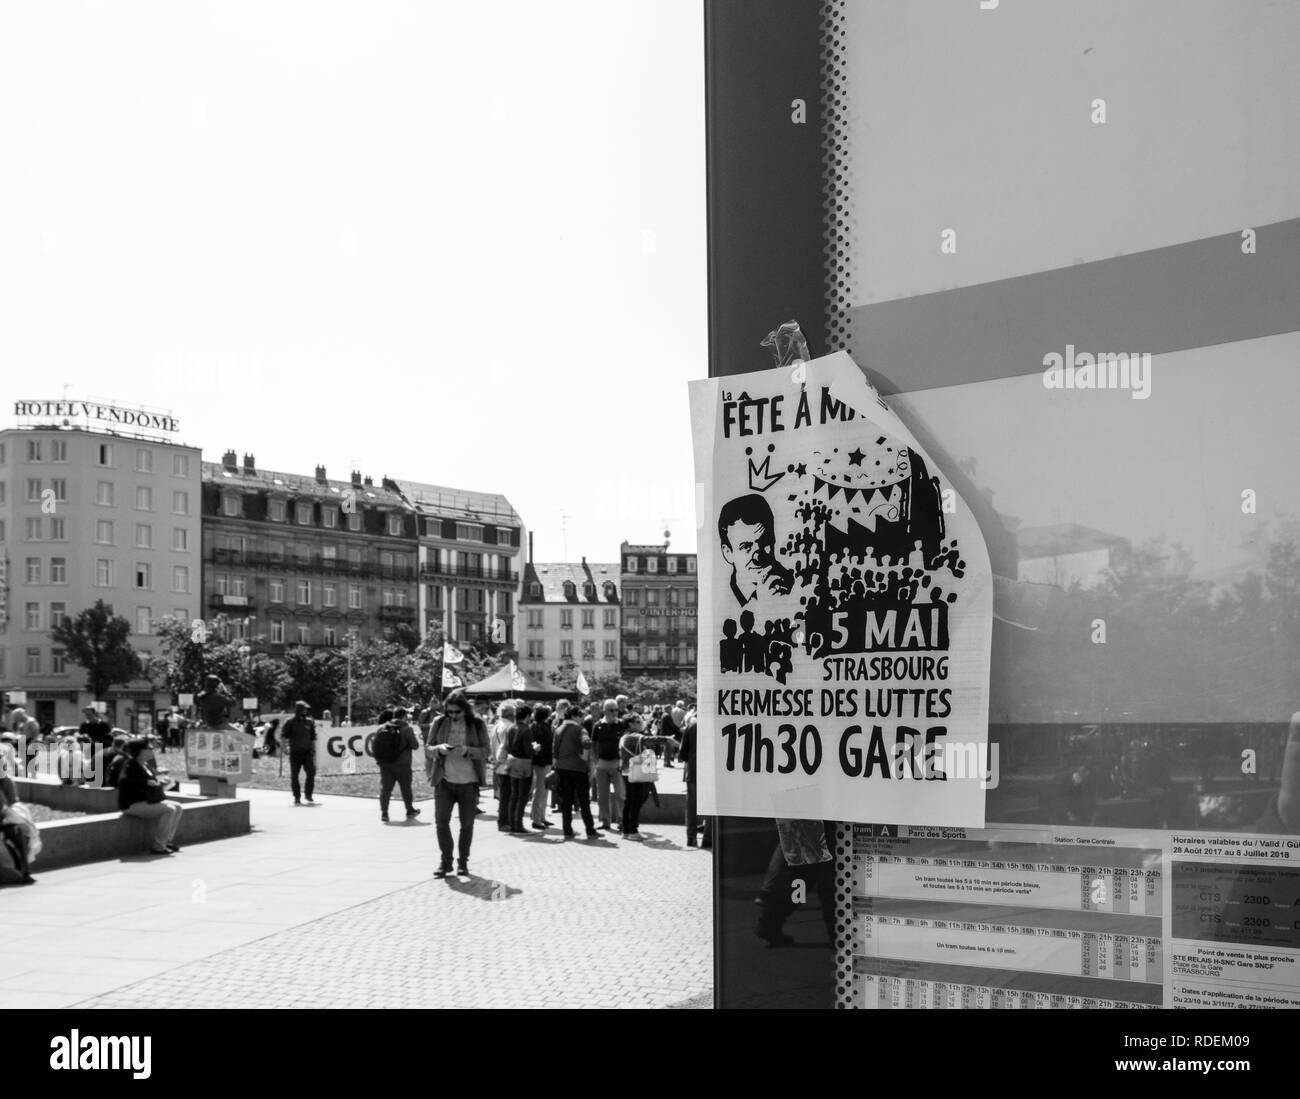 STRASBOURG, FRANCE - MAY 5, 2018: People making a party protest Fete a Macron in front of Gare de Strasbourg  poster calling to party  Stock Photo